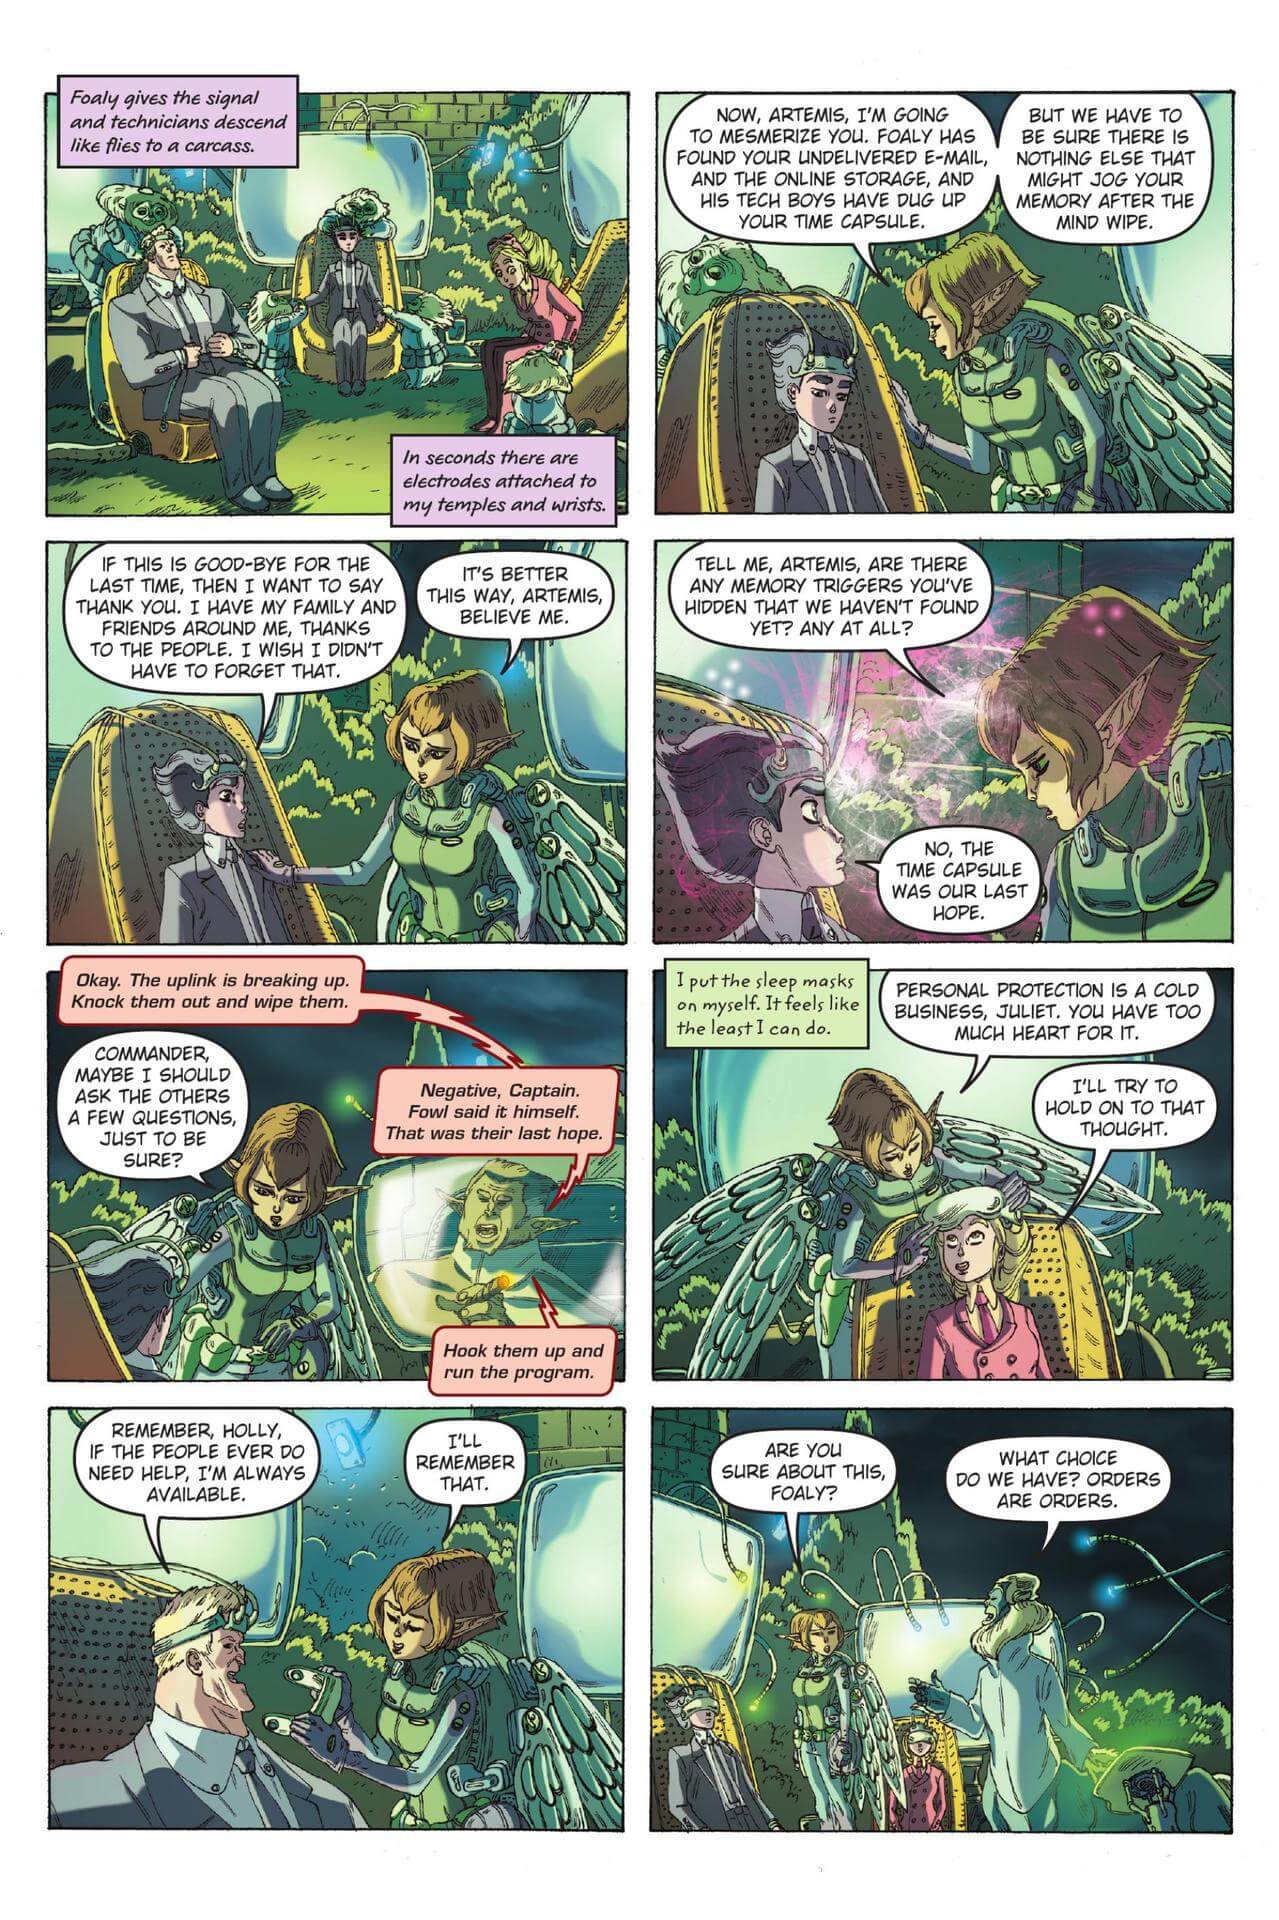 page 105 of artemis fowl eternity code graphic novel